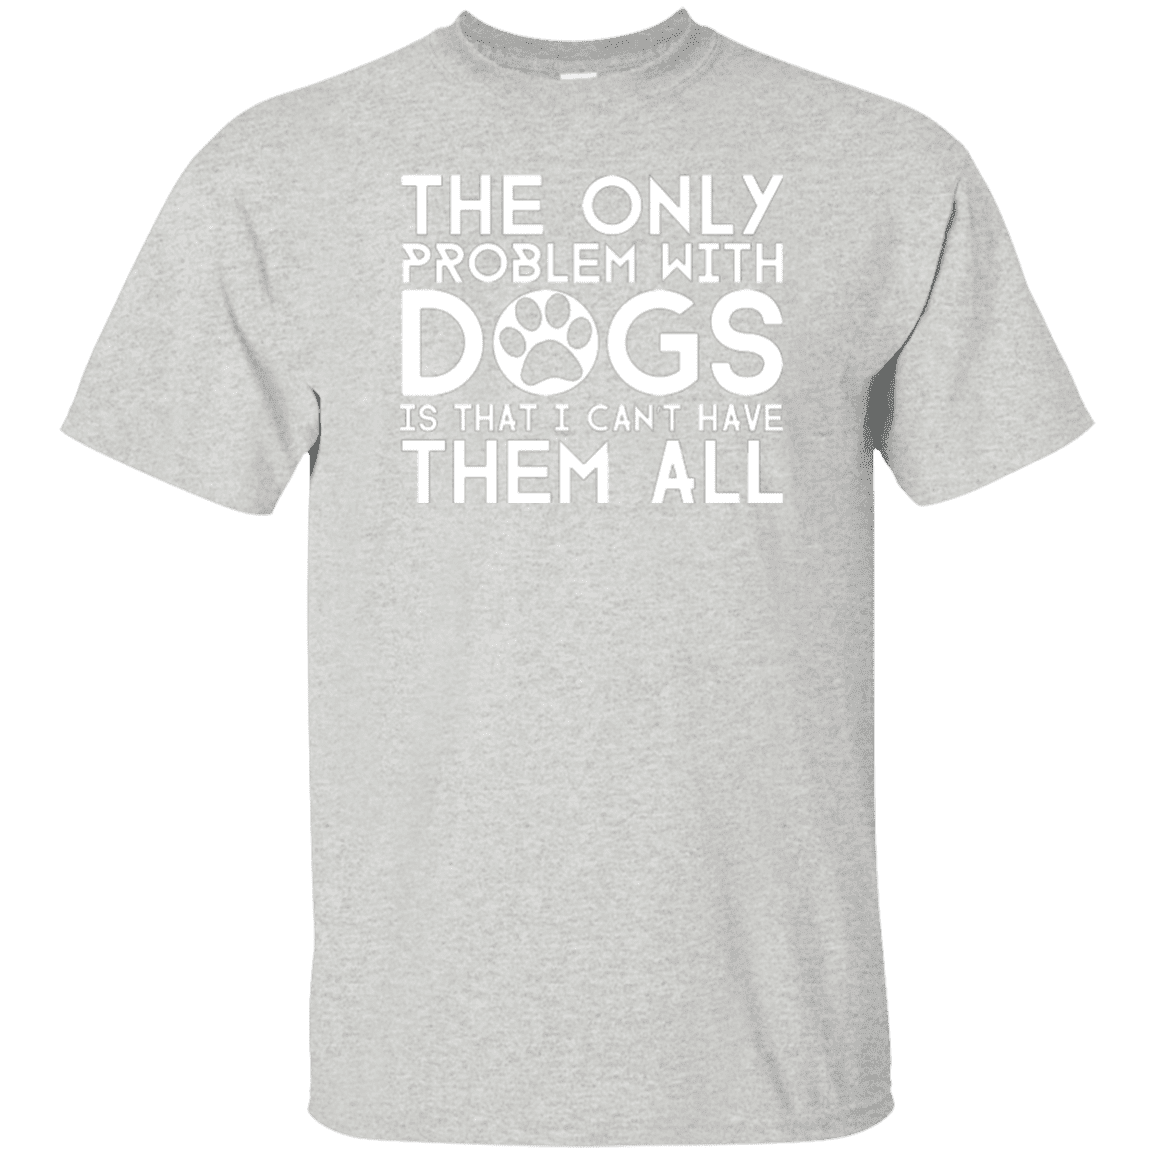 The Only Problem With Dogs - Youth T Shirt.